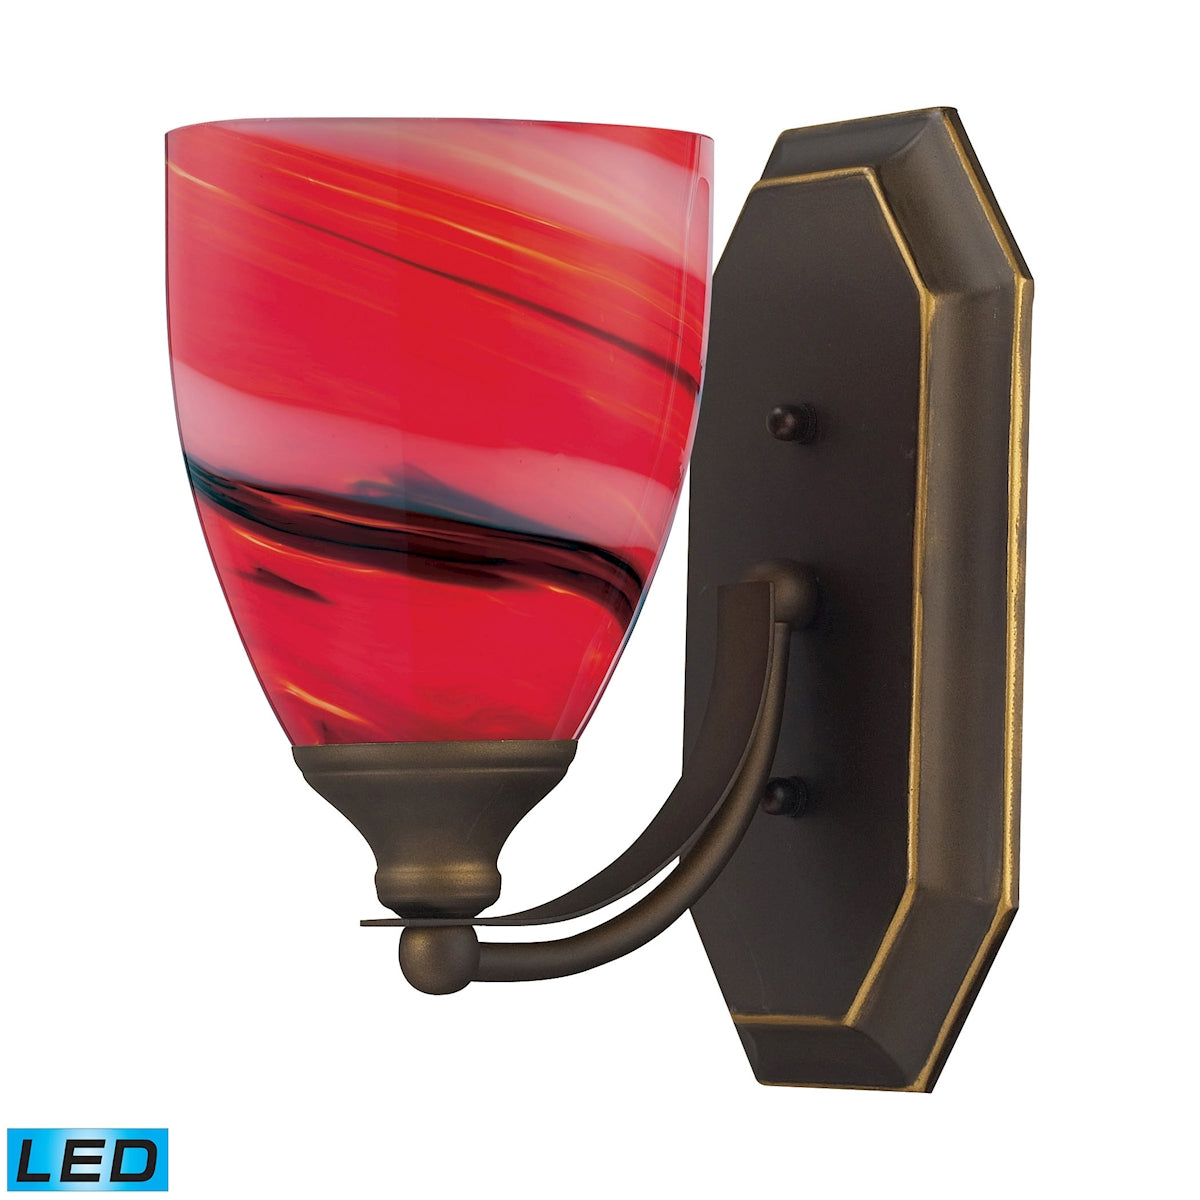 ELK Lighting 570-1B-CY-LED Mix-N-Match Vanity 1-Light Wall Lamp in Aged Bronze with Canary Glass - Includes LED Bulb